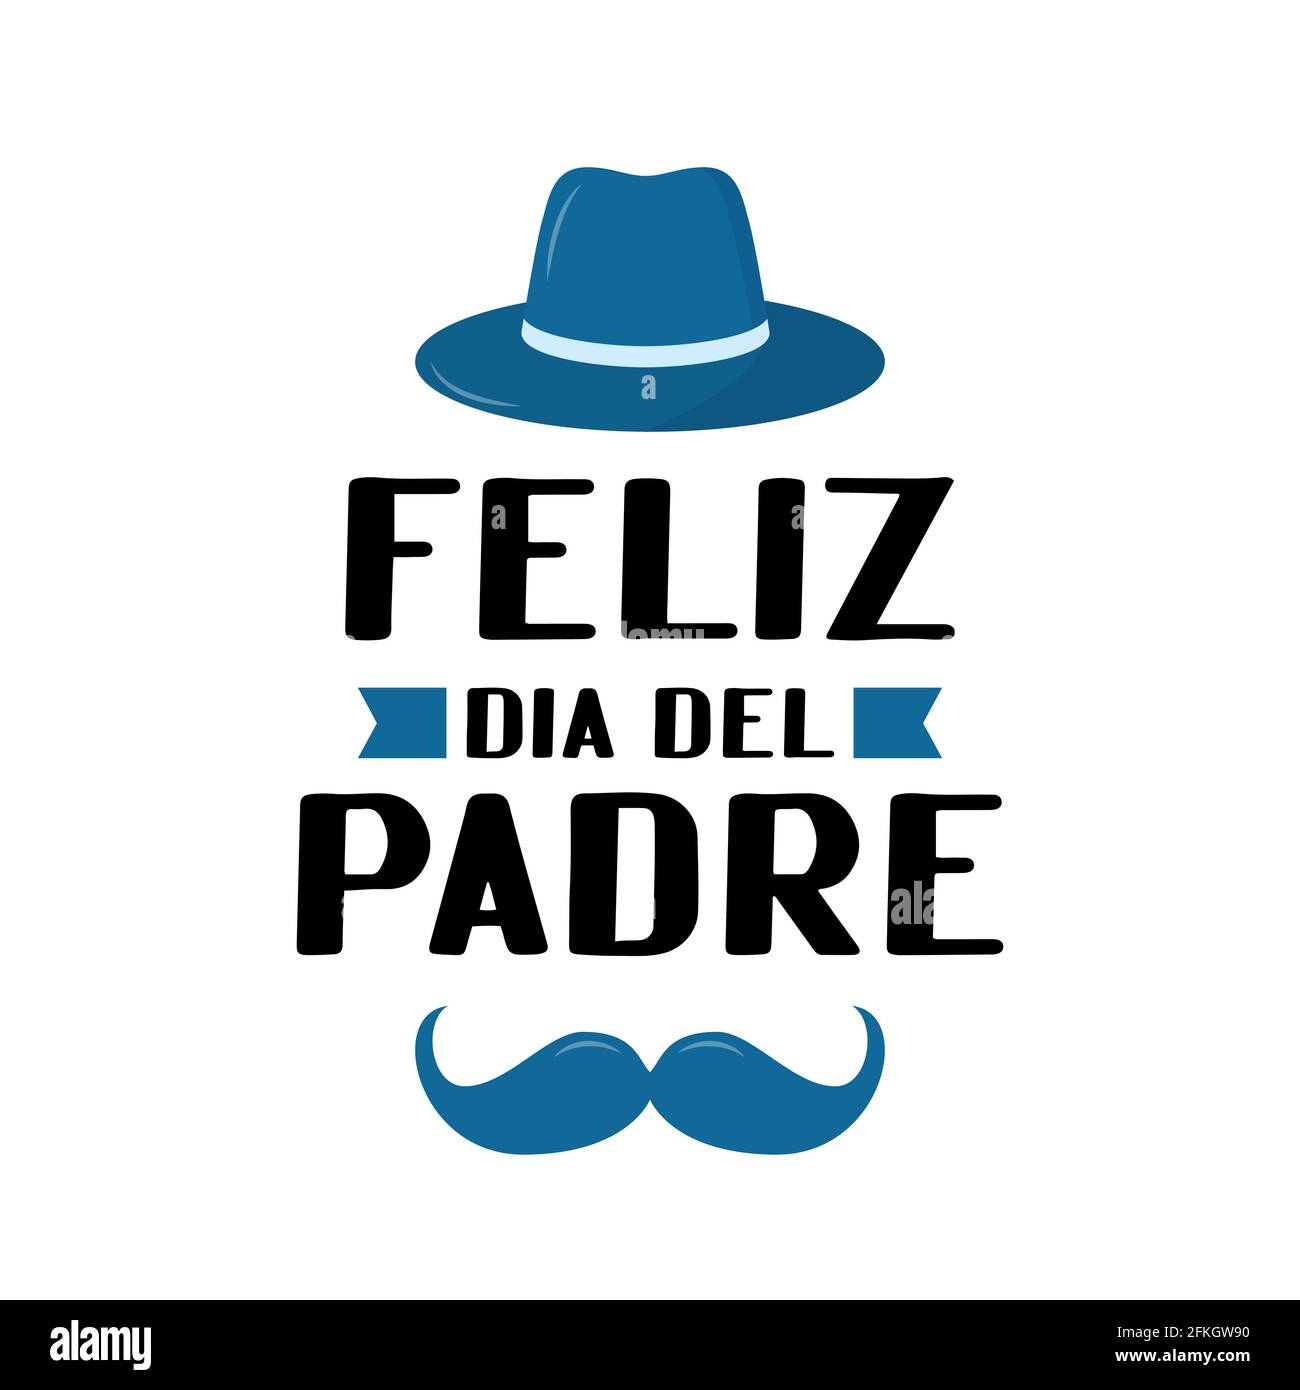 Dia del padre Cut Out Stock Images & Pictures - Alamy